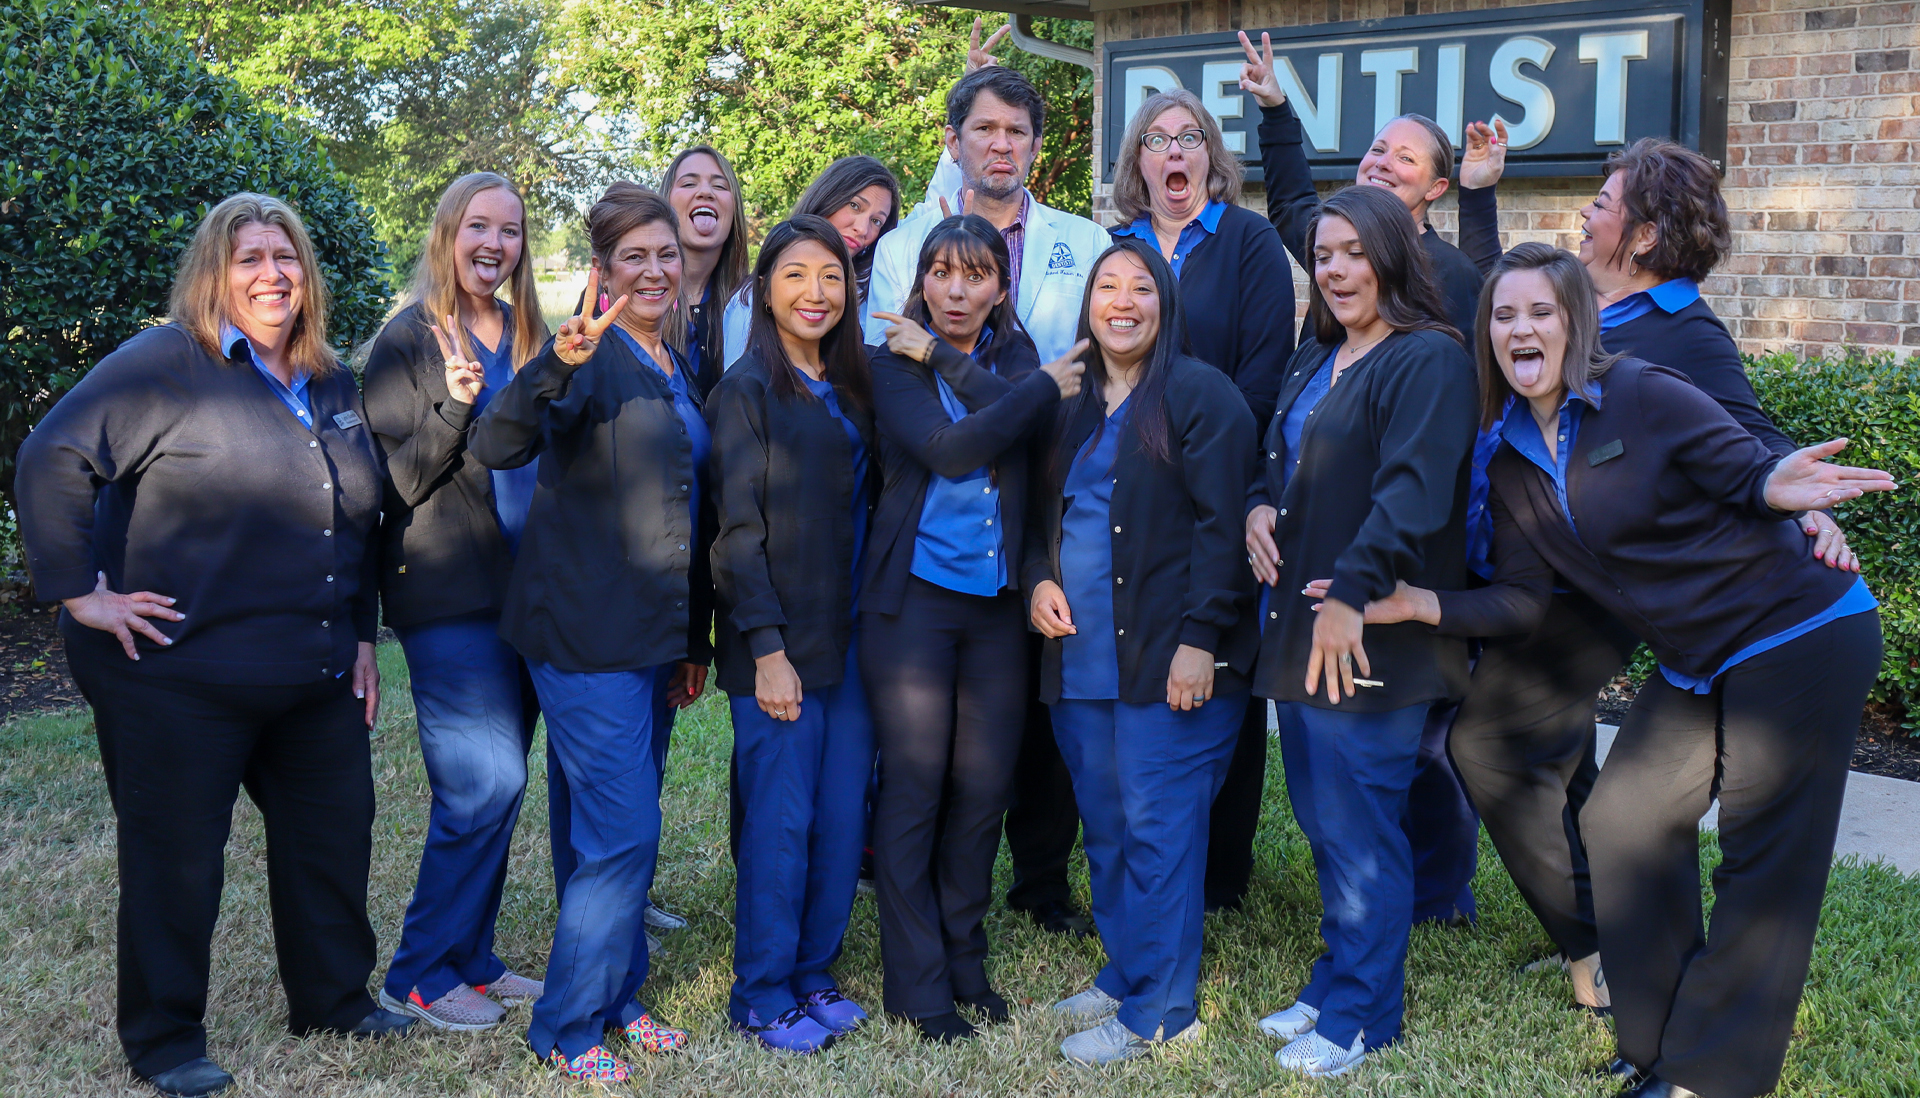 Richard F. Fossum, D D S and his trusted dental team